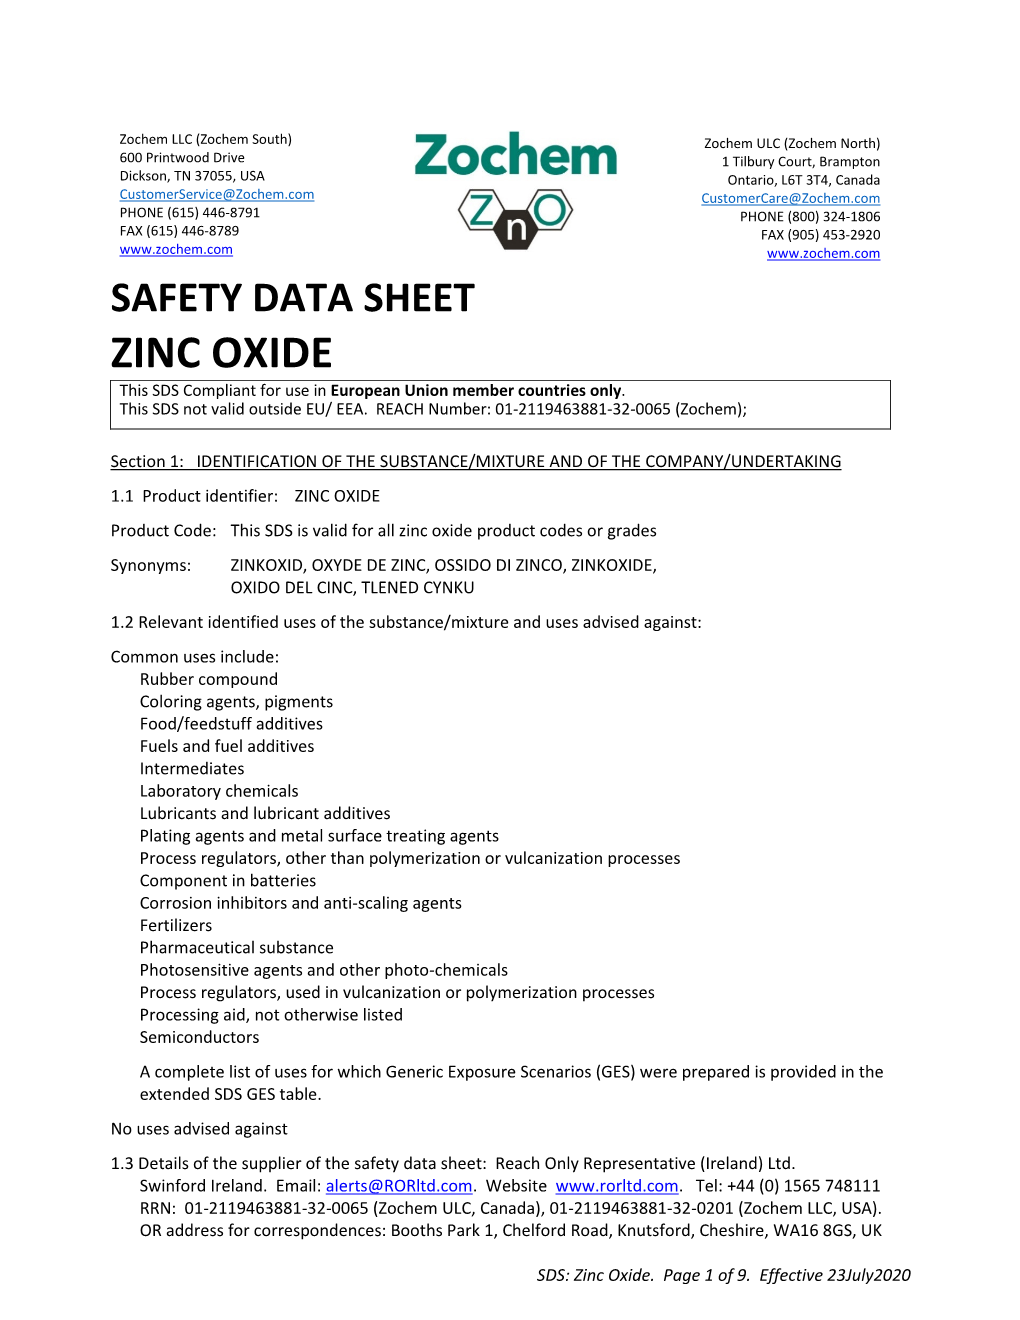 SDS Zinc Oxide, Valid in European Union Only